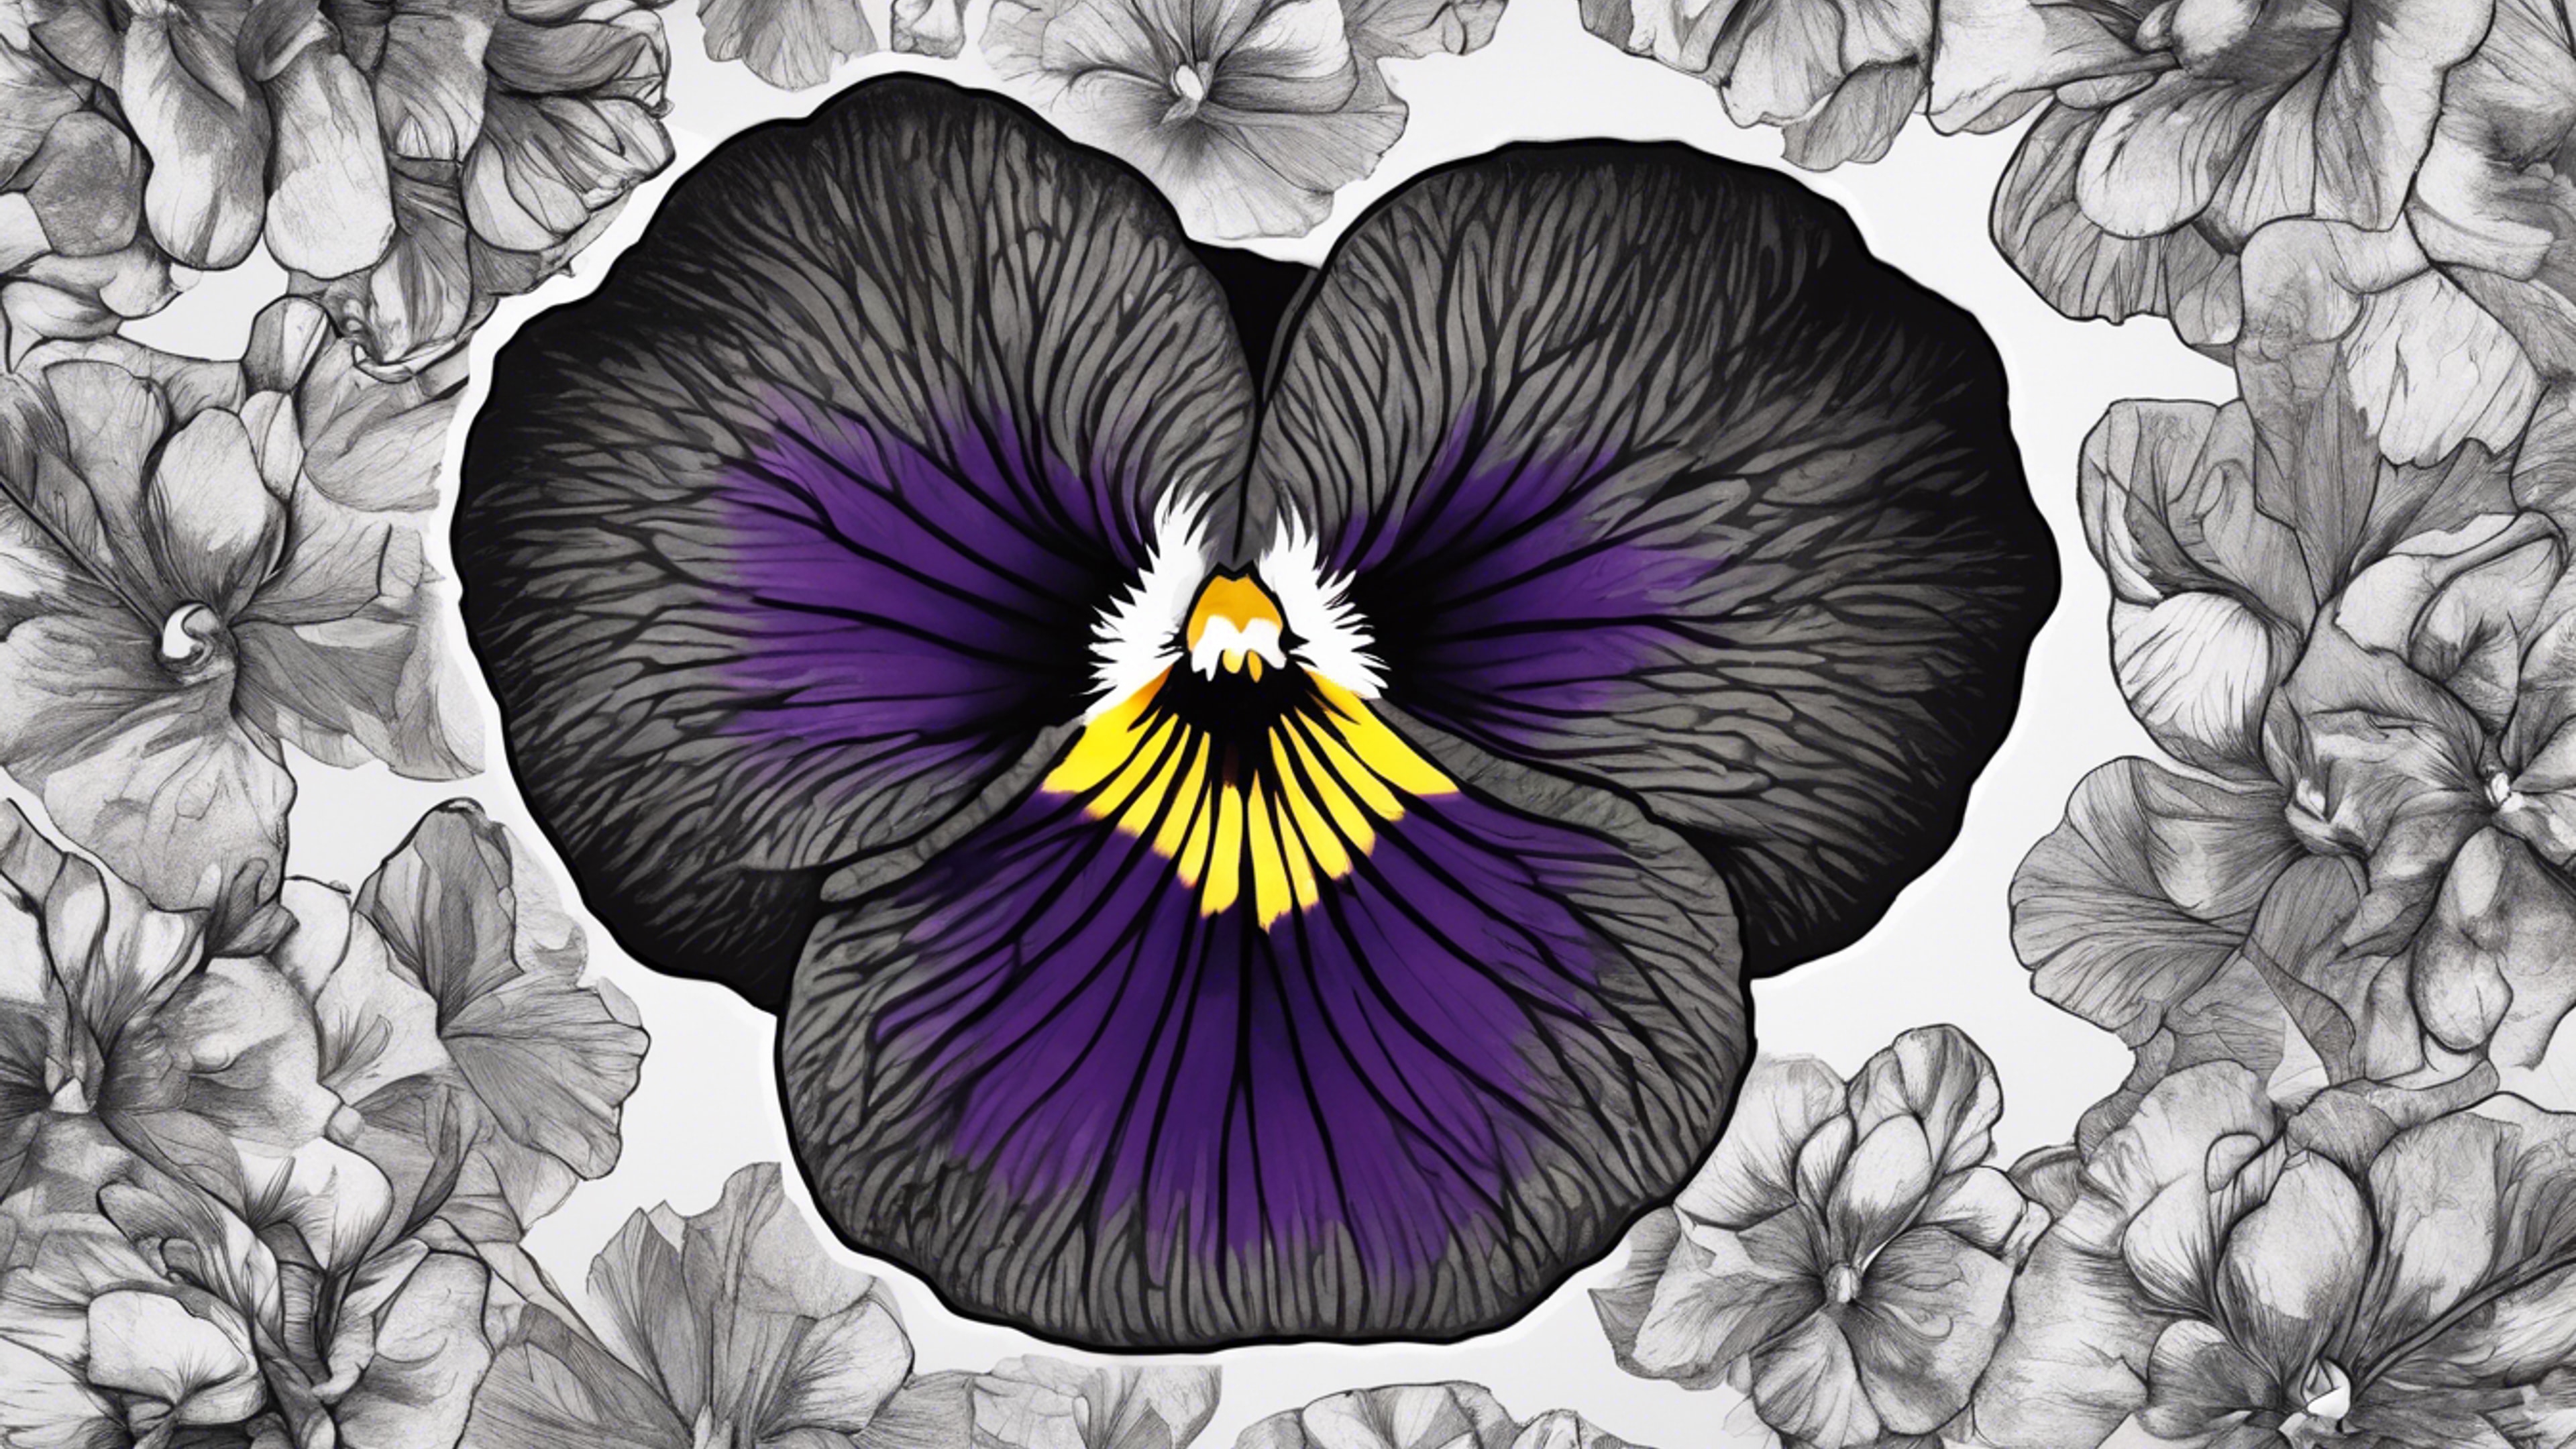 A beautifully detailed drawing of a black pansy with a heart-shaped pattern in the center. duvar kağıdı[63bdabf8c2fc479fa211]